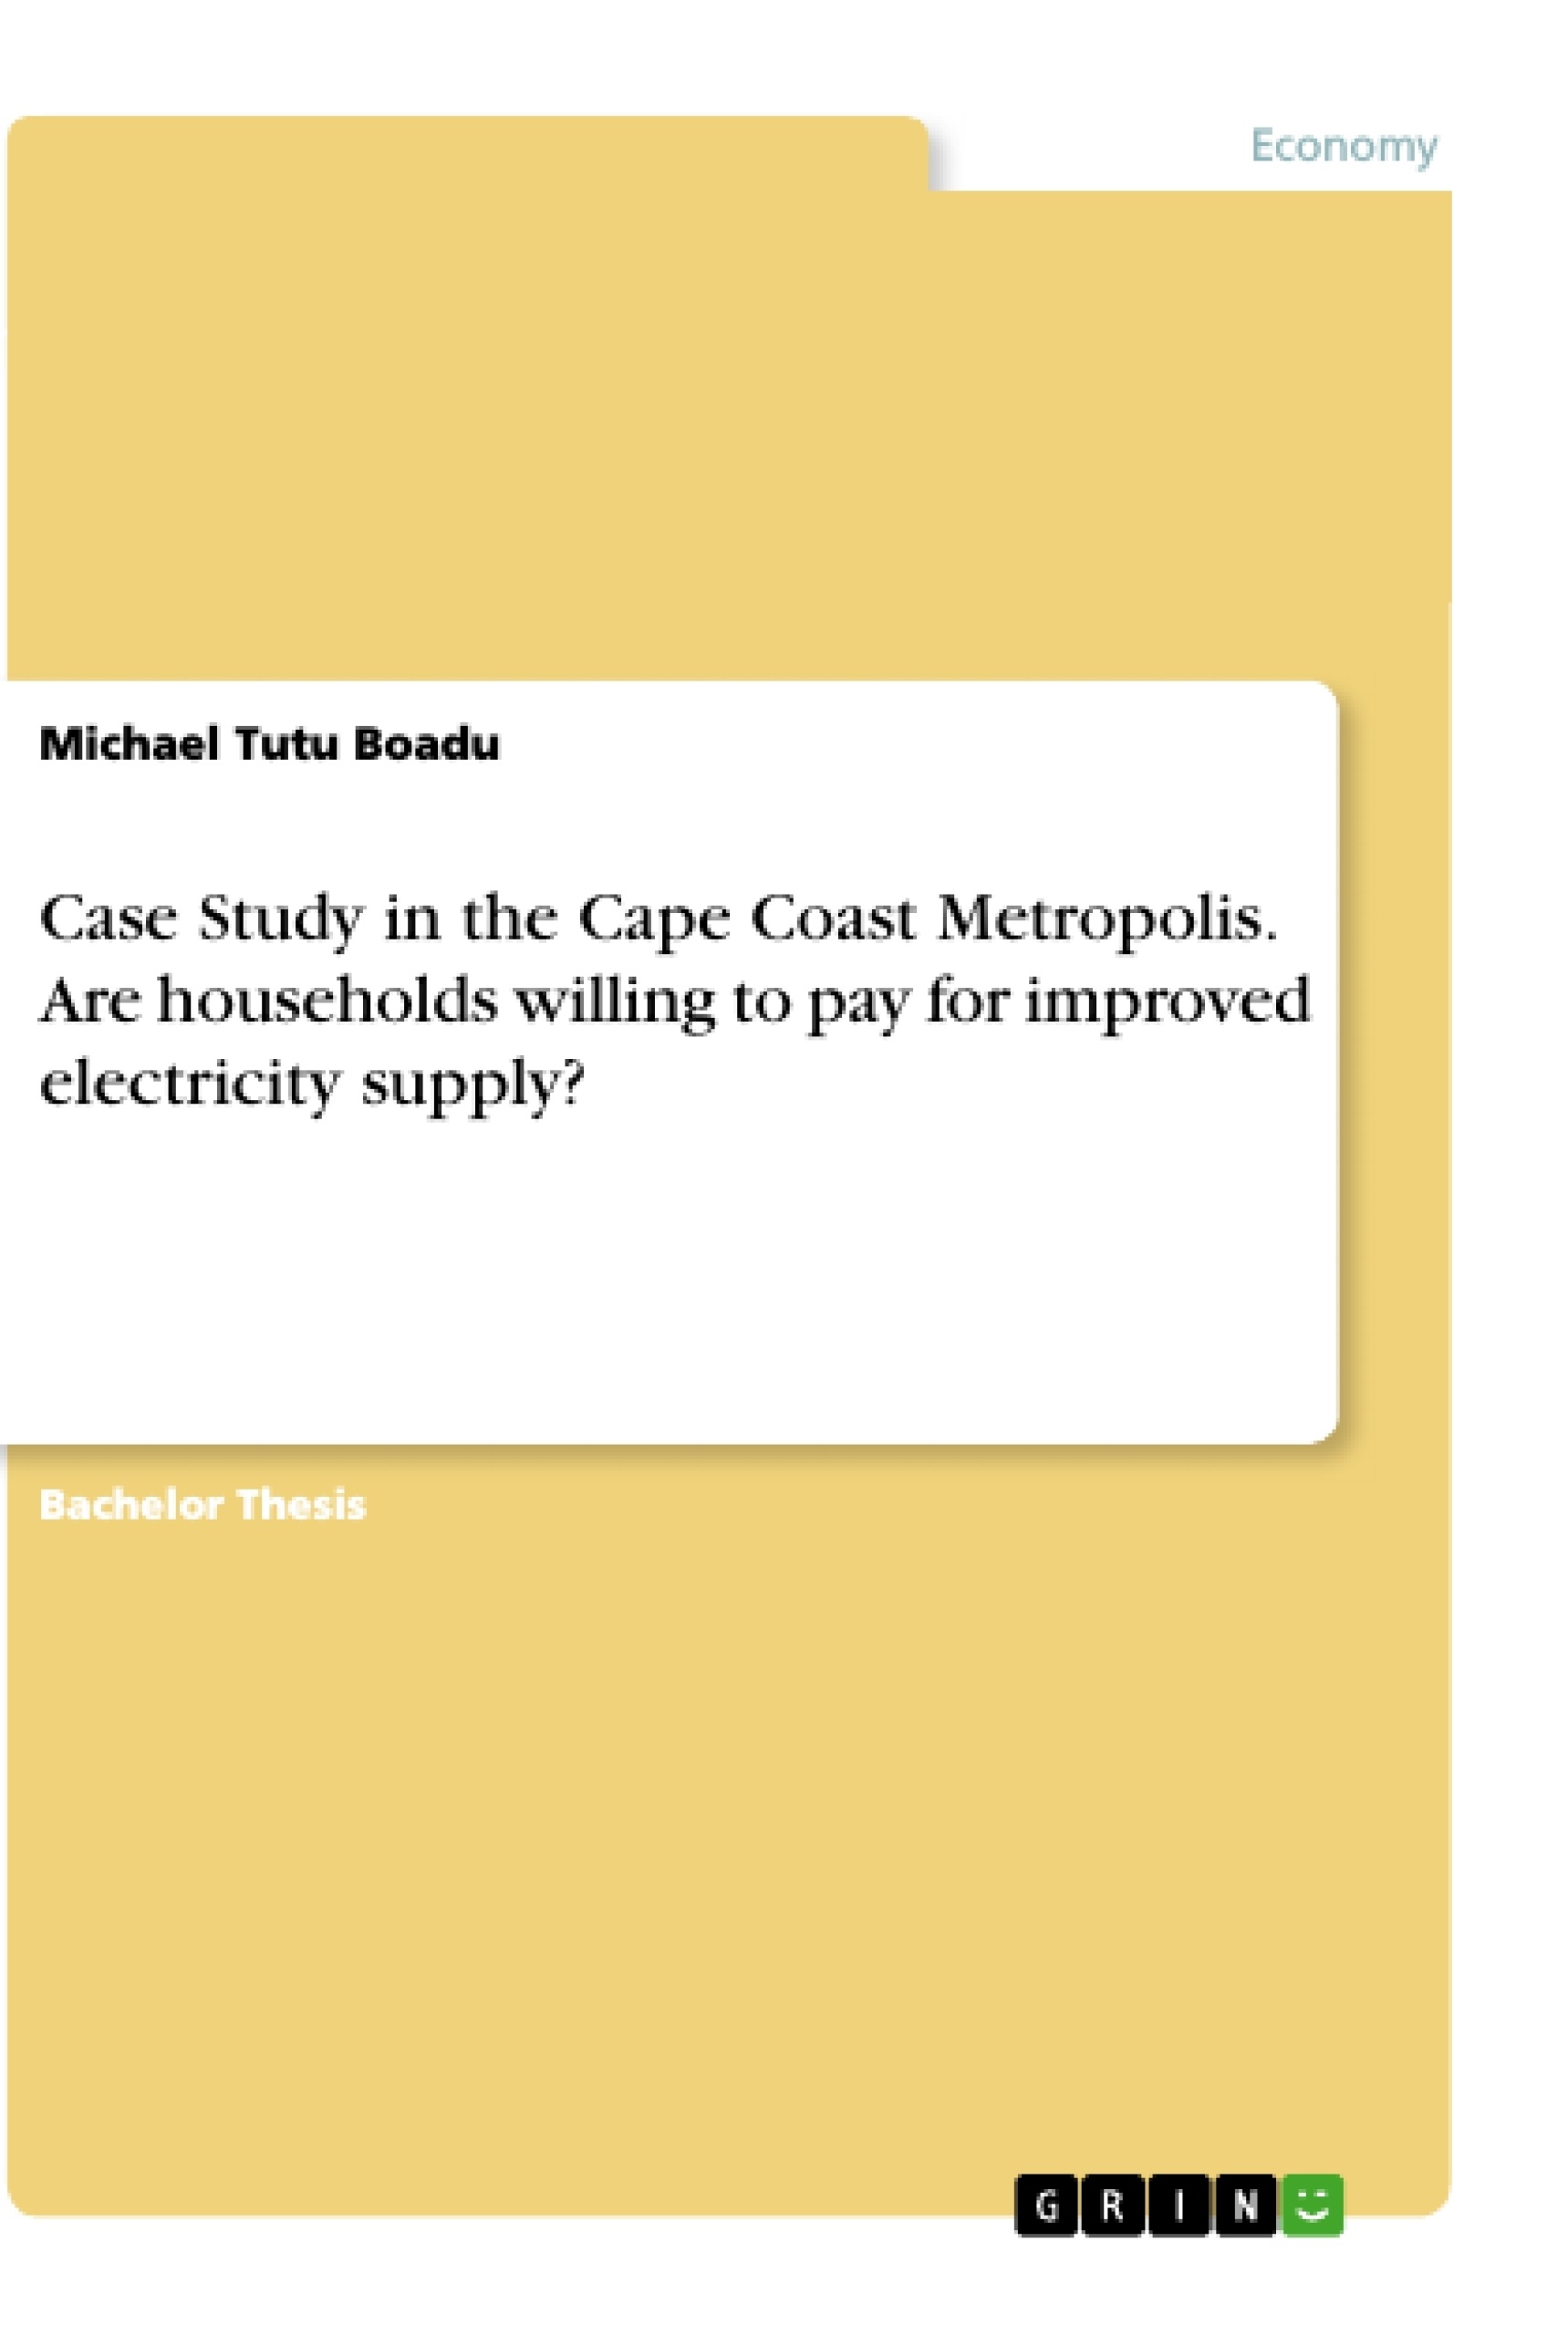 Title: Case Study in the Cape Coast Metropolis. Are households willing to pay for improved electricity supply?